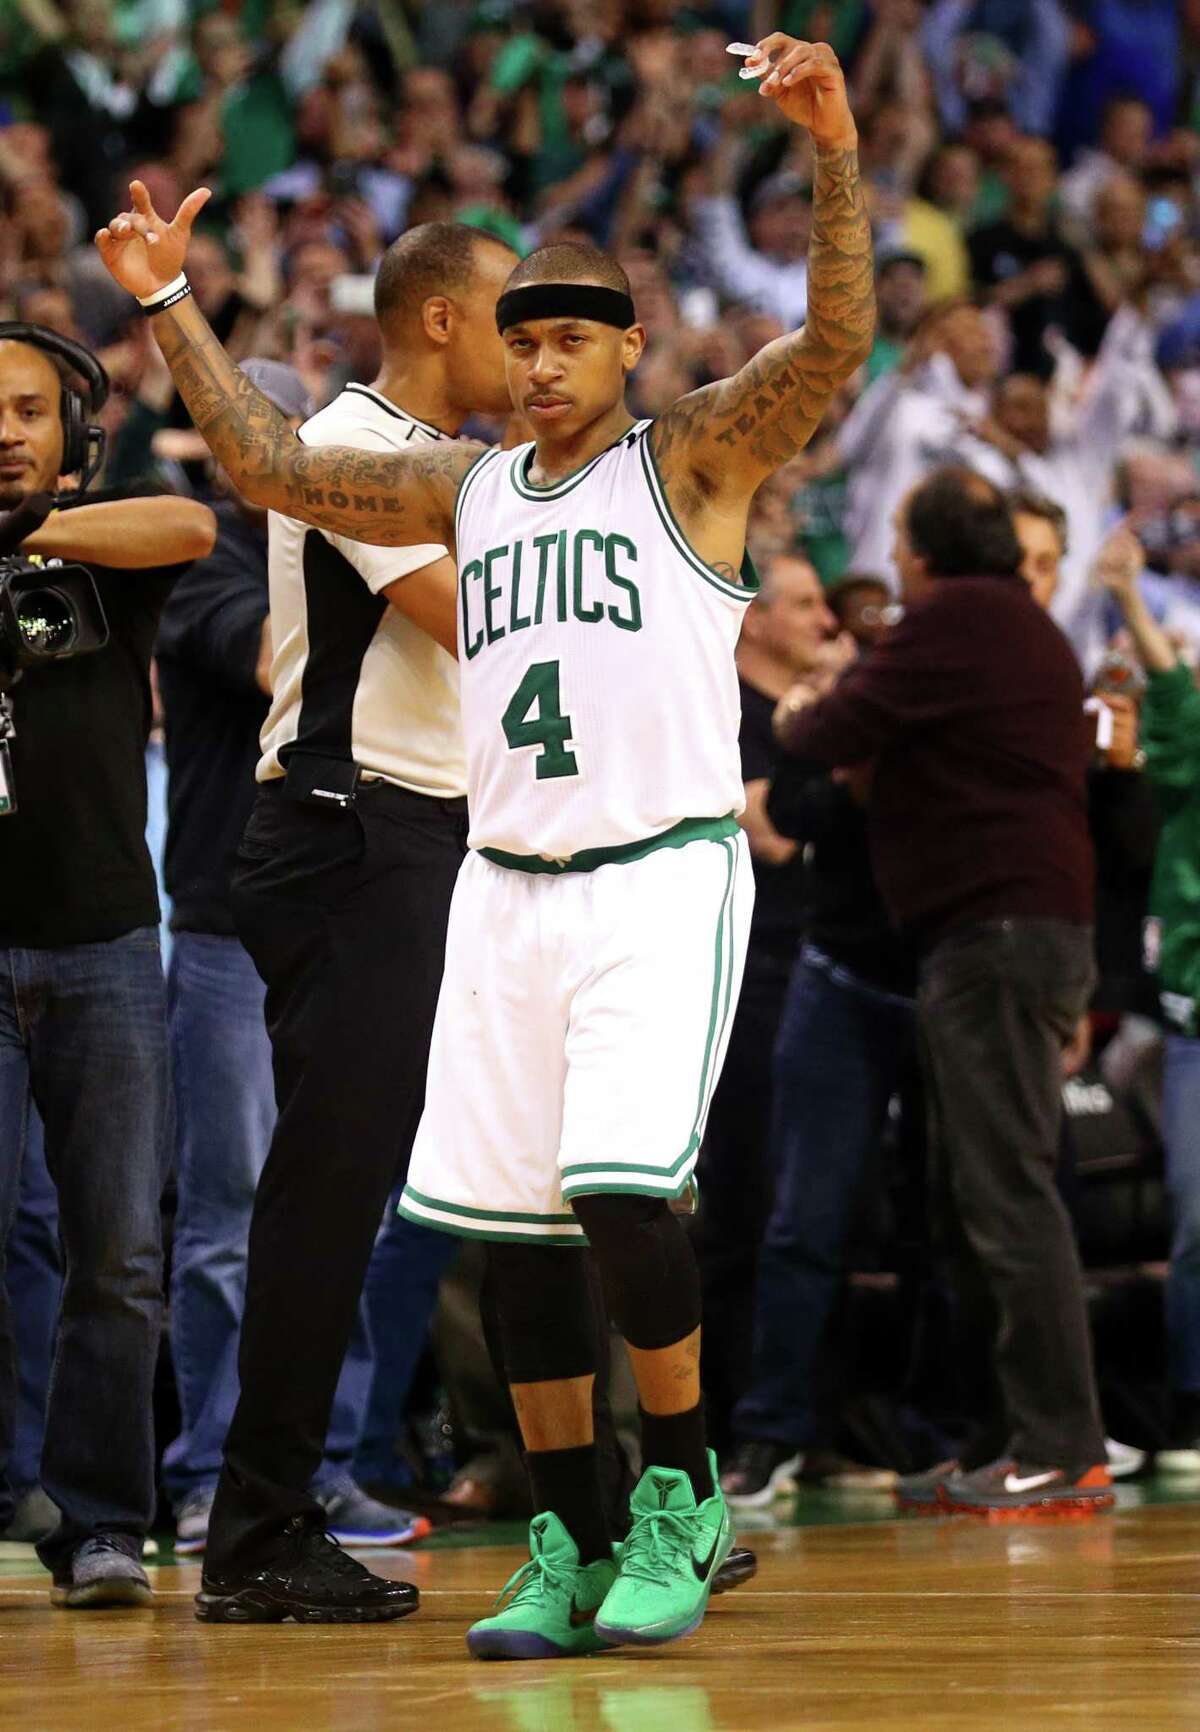 BOSTON, MA - MAY 2: Isaiah Thomas #4 of the Boston Celtics celebrates at the end the Celtics 129-119 overtime win over the Washington Wizards in Game Two of the Eastern Conference Semifinals at TD Garden on May 2, 2017 in Boston, Massachusetts. NOTE TO USER: User expressly acknowledges and agrees that, by downloading and or using this Photograph, user is consenting to the terms and conditions of the Getty Images License Agreement. (Photo by Maddie Meyer/Getty Images) ORG XMIT: 700042690